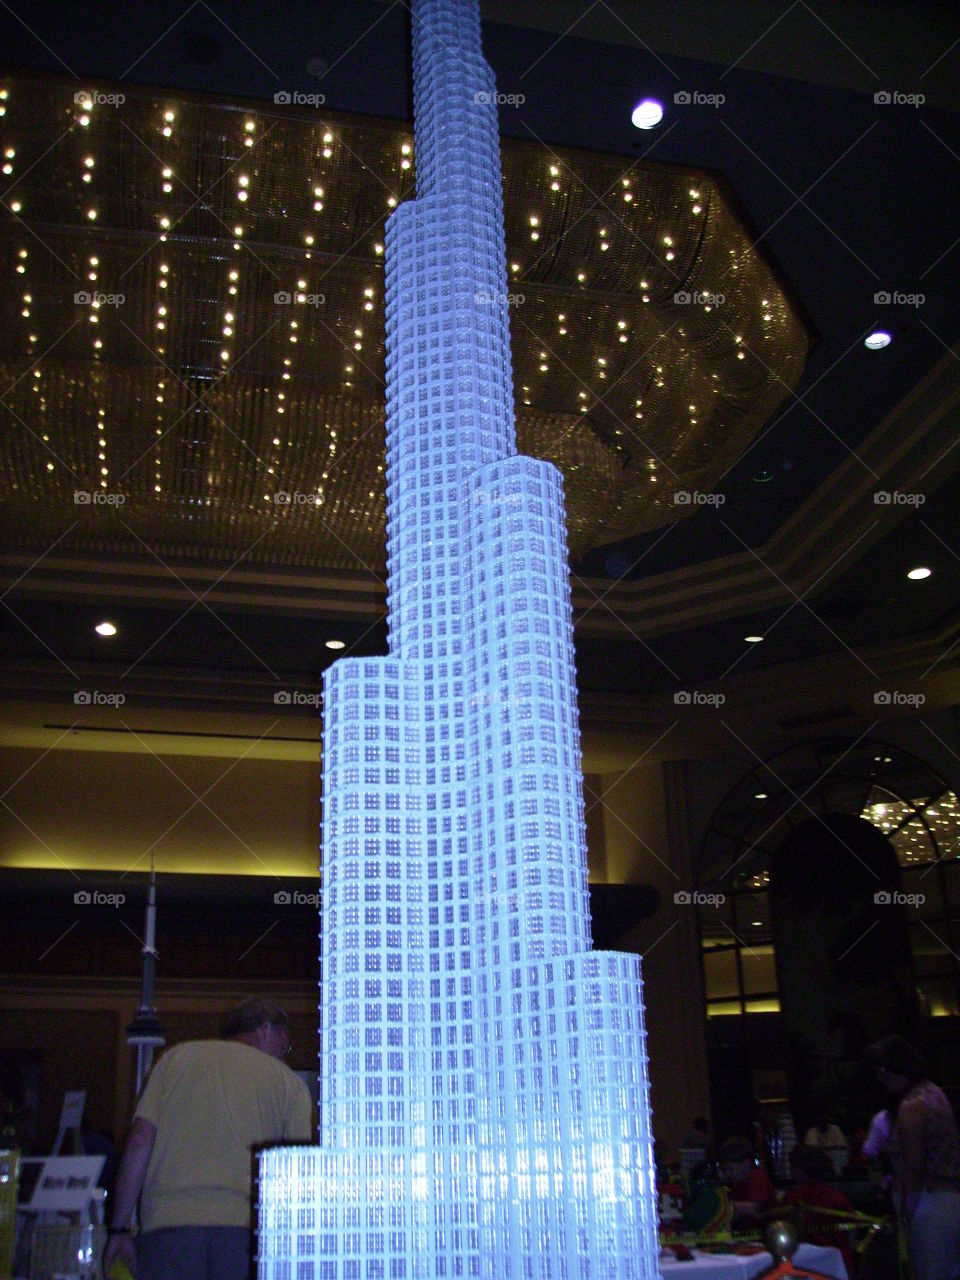 Giant tower made out of Legos on display during a Lego convention